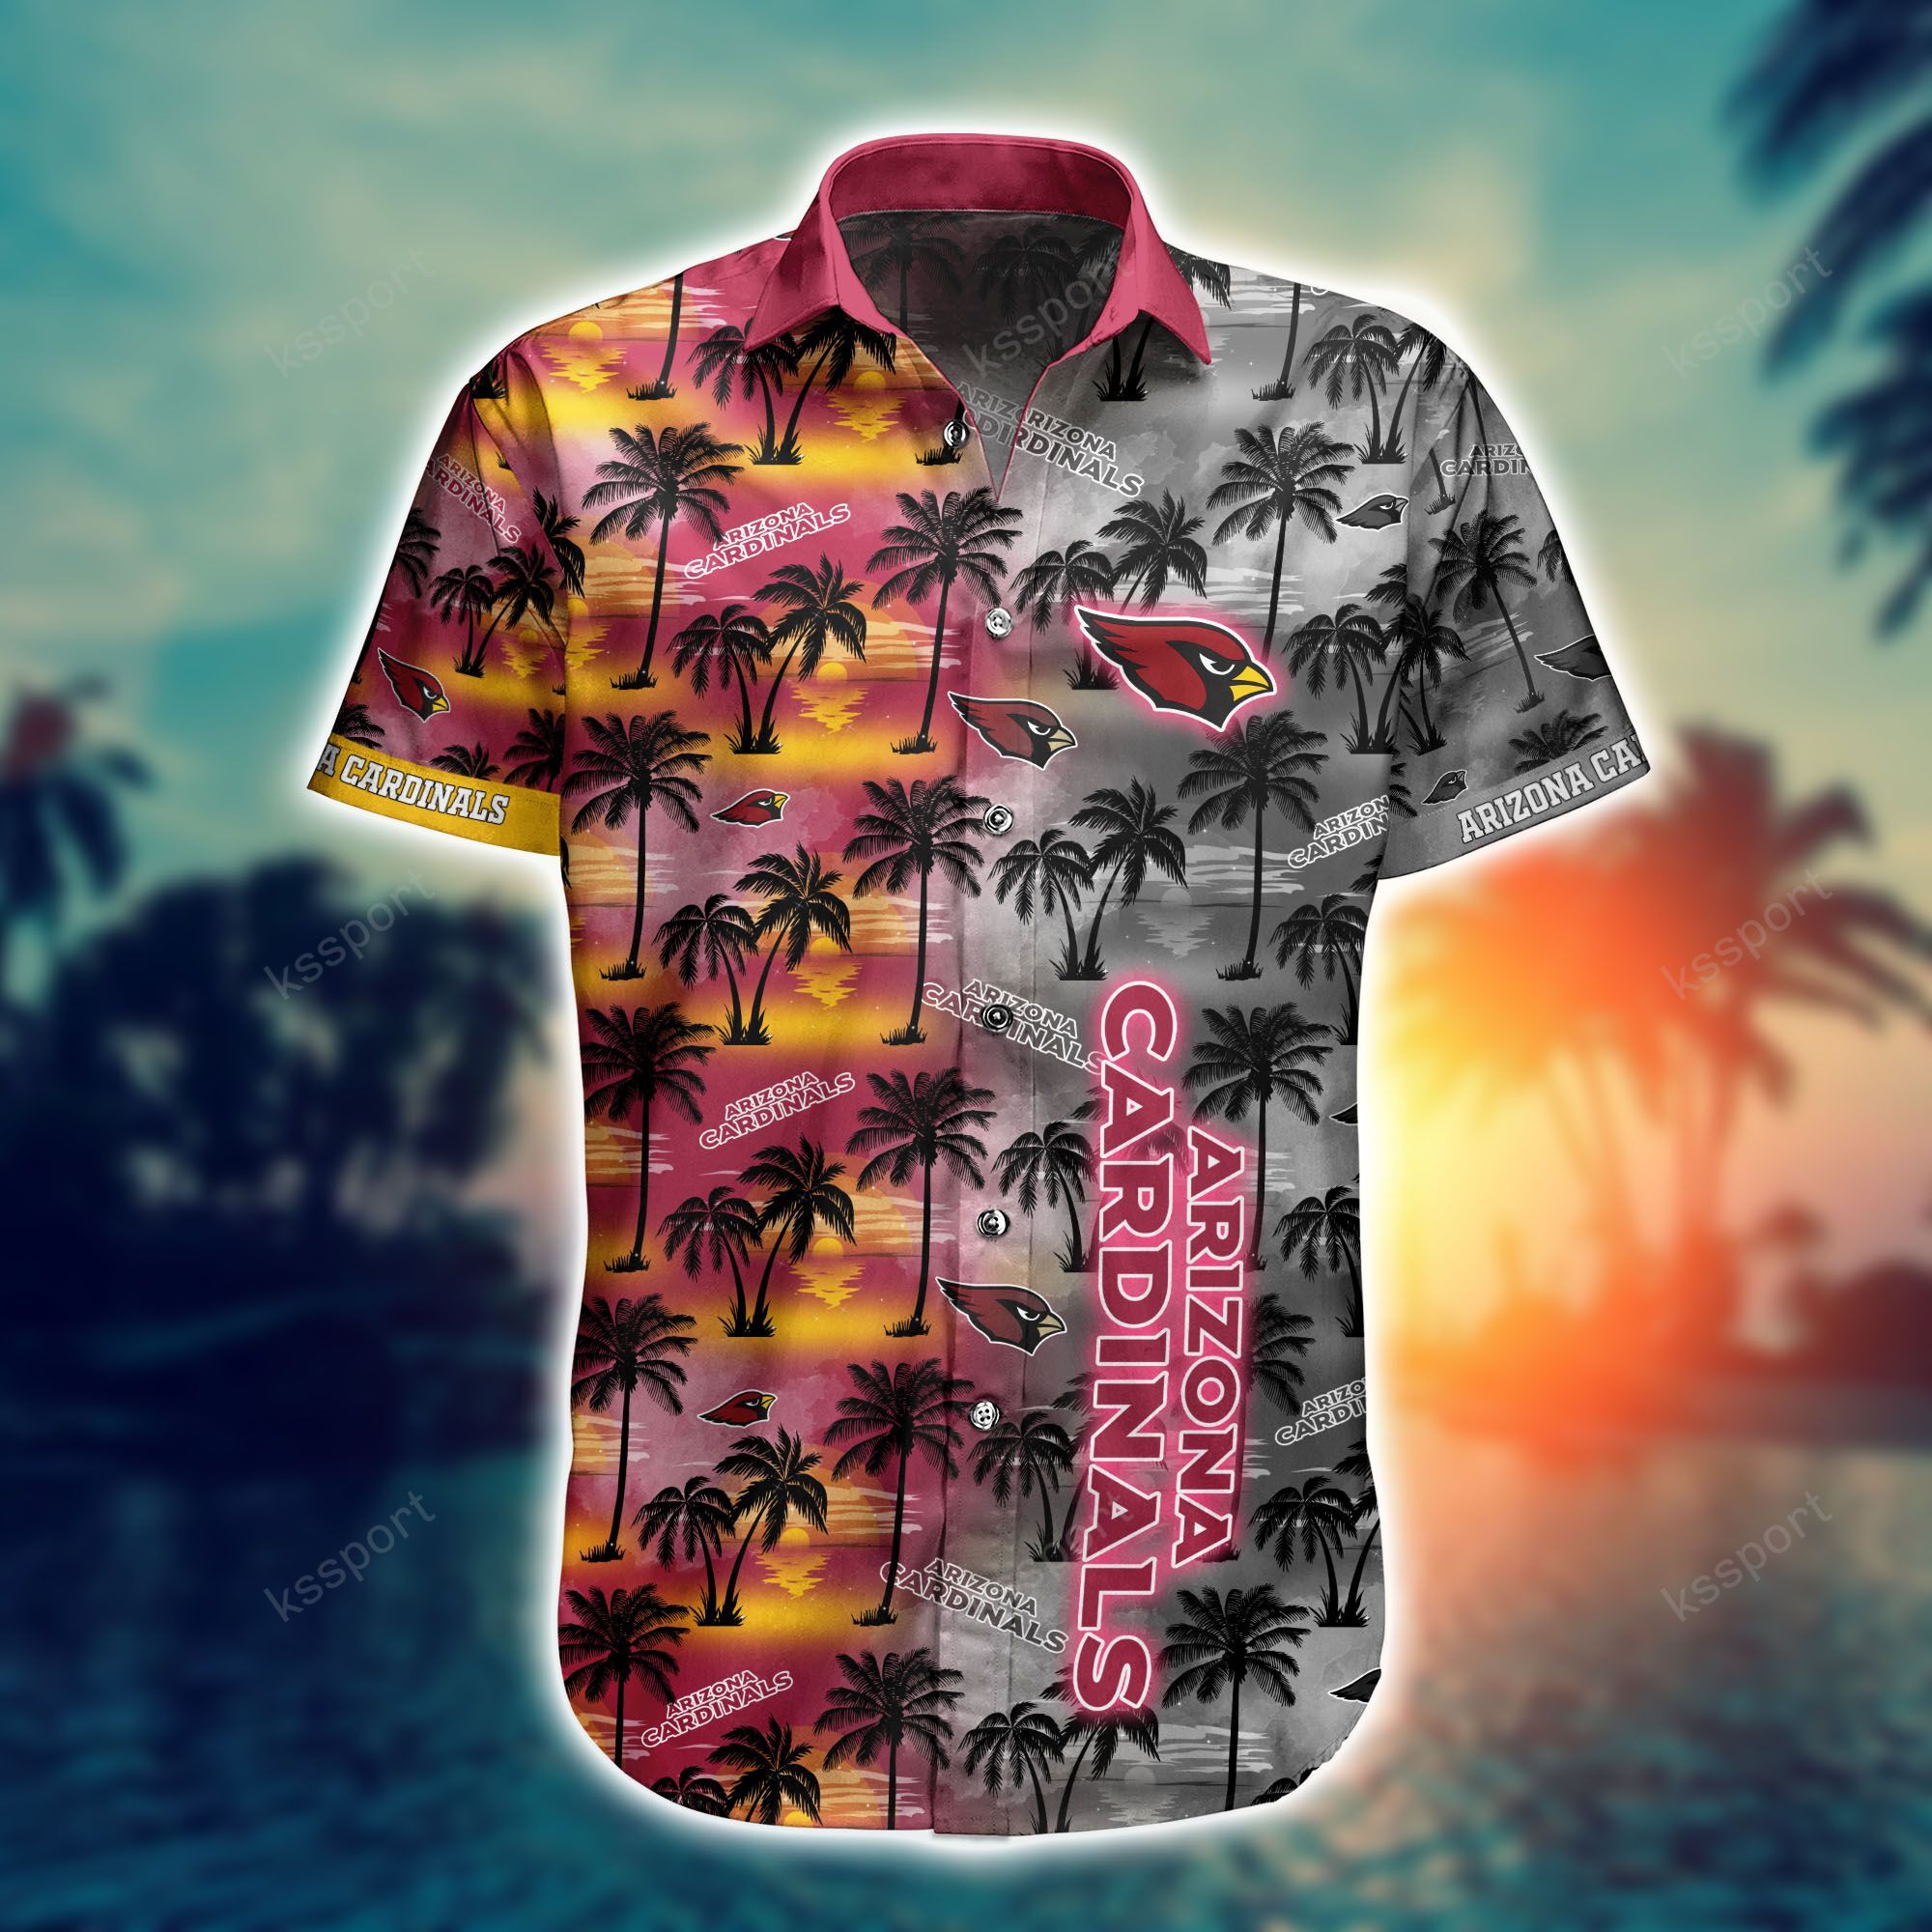 Top cool Hawaiian shirt 2022 - Make sure you get yours today before they run out! 208